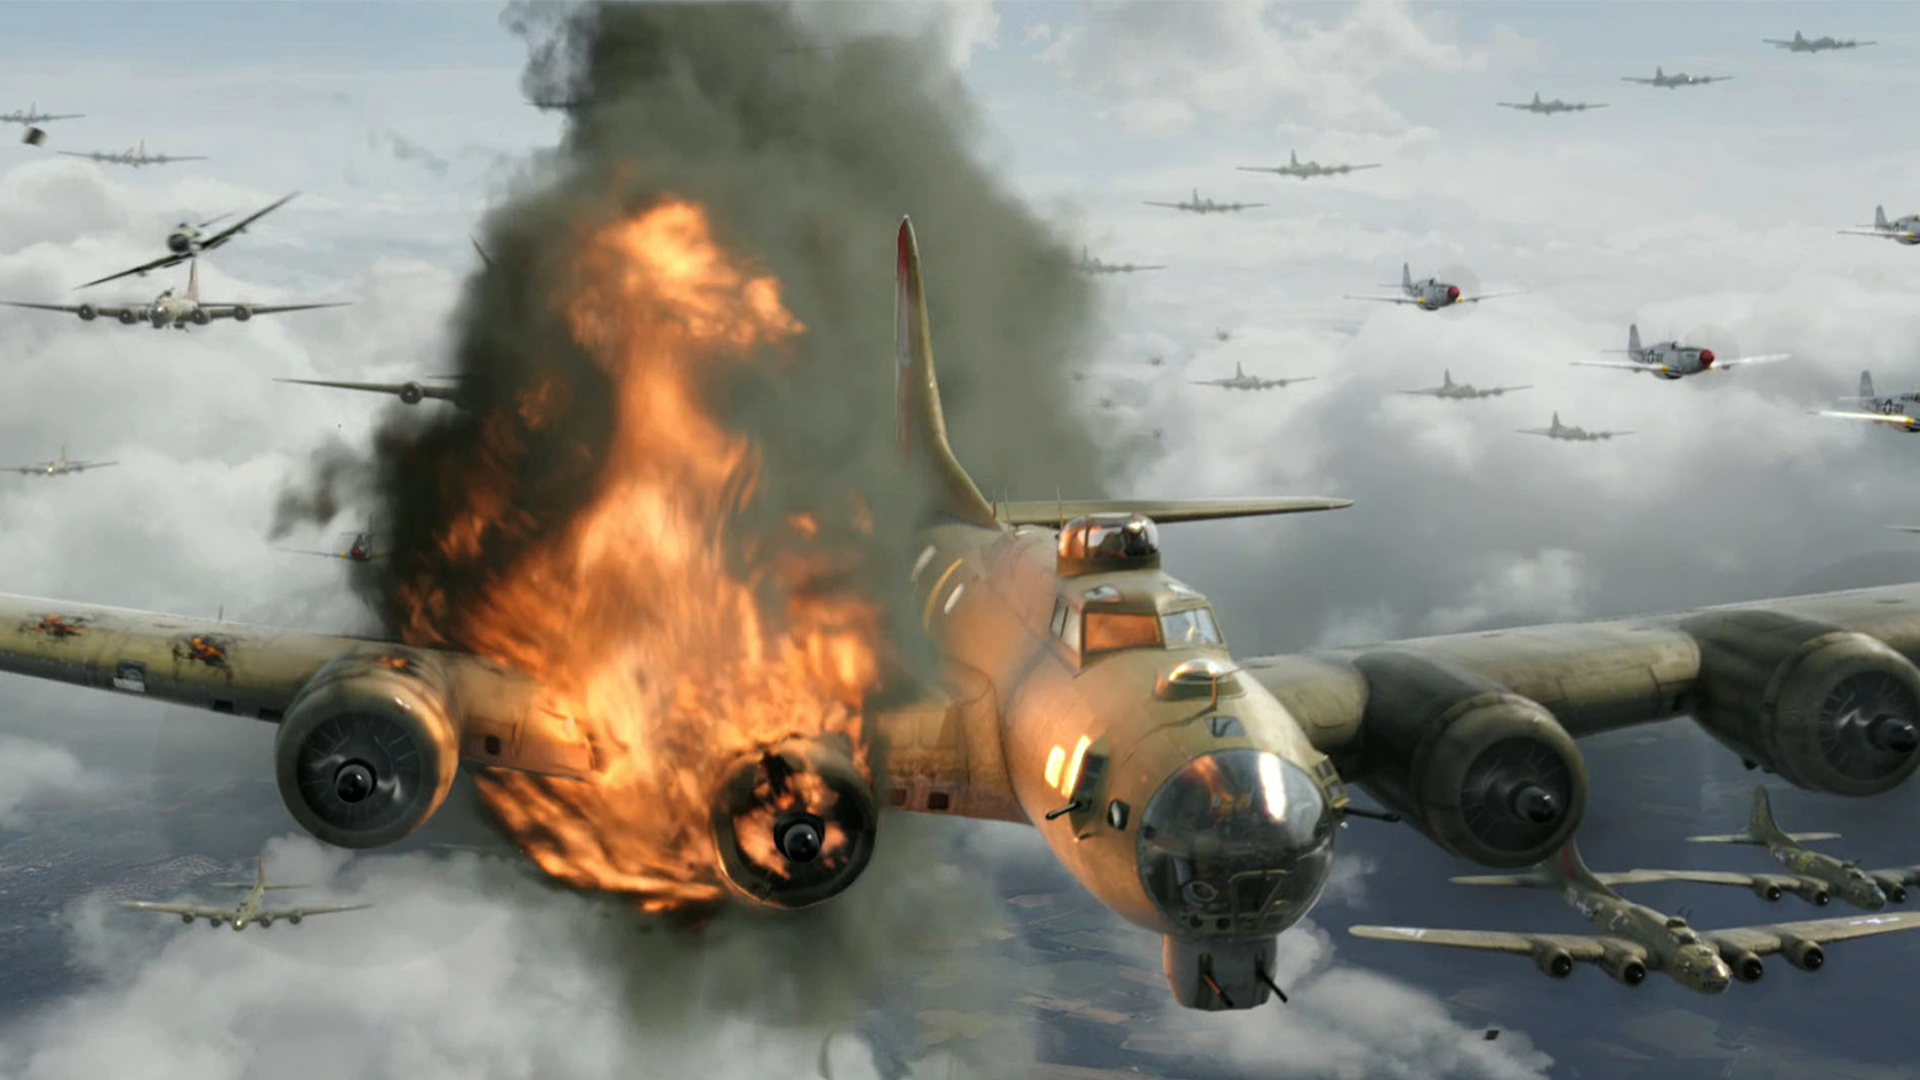 movie, red tails, aircraft, airplane